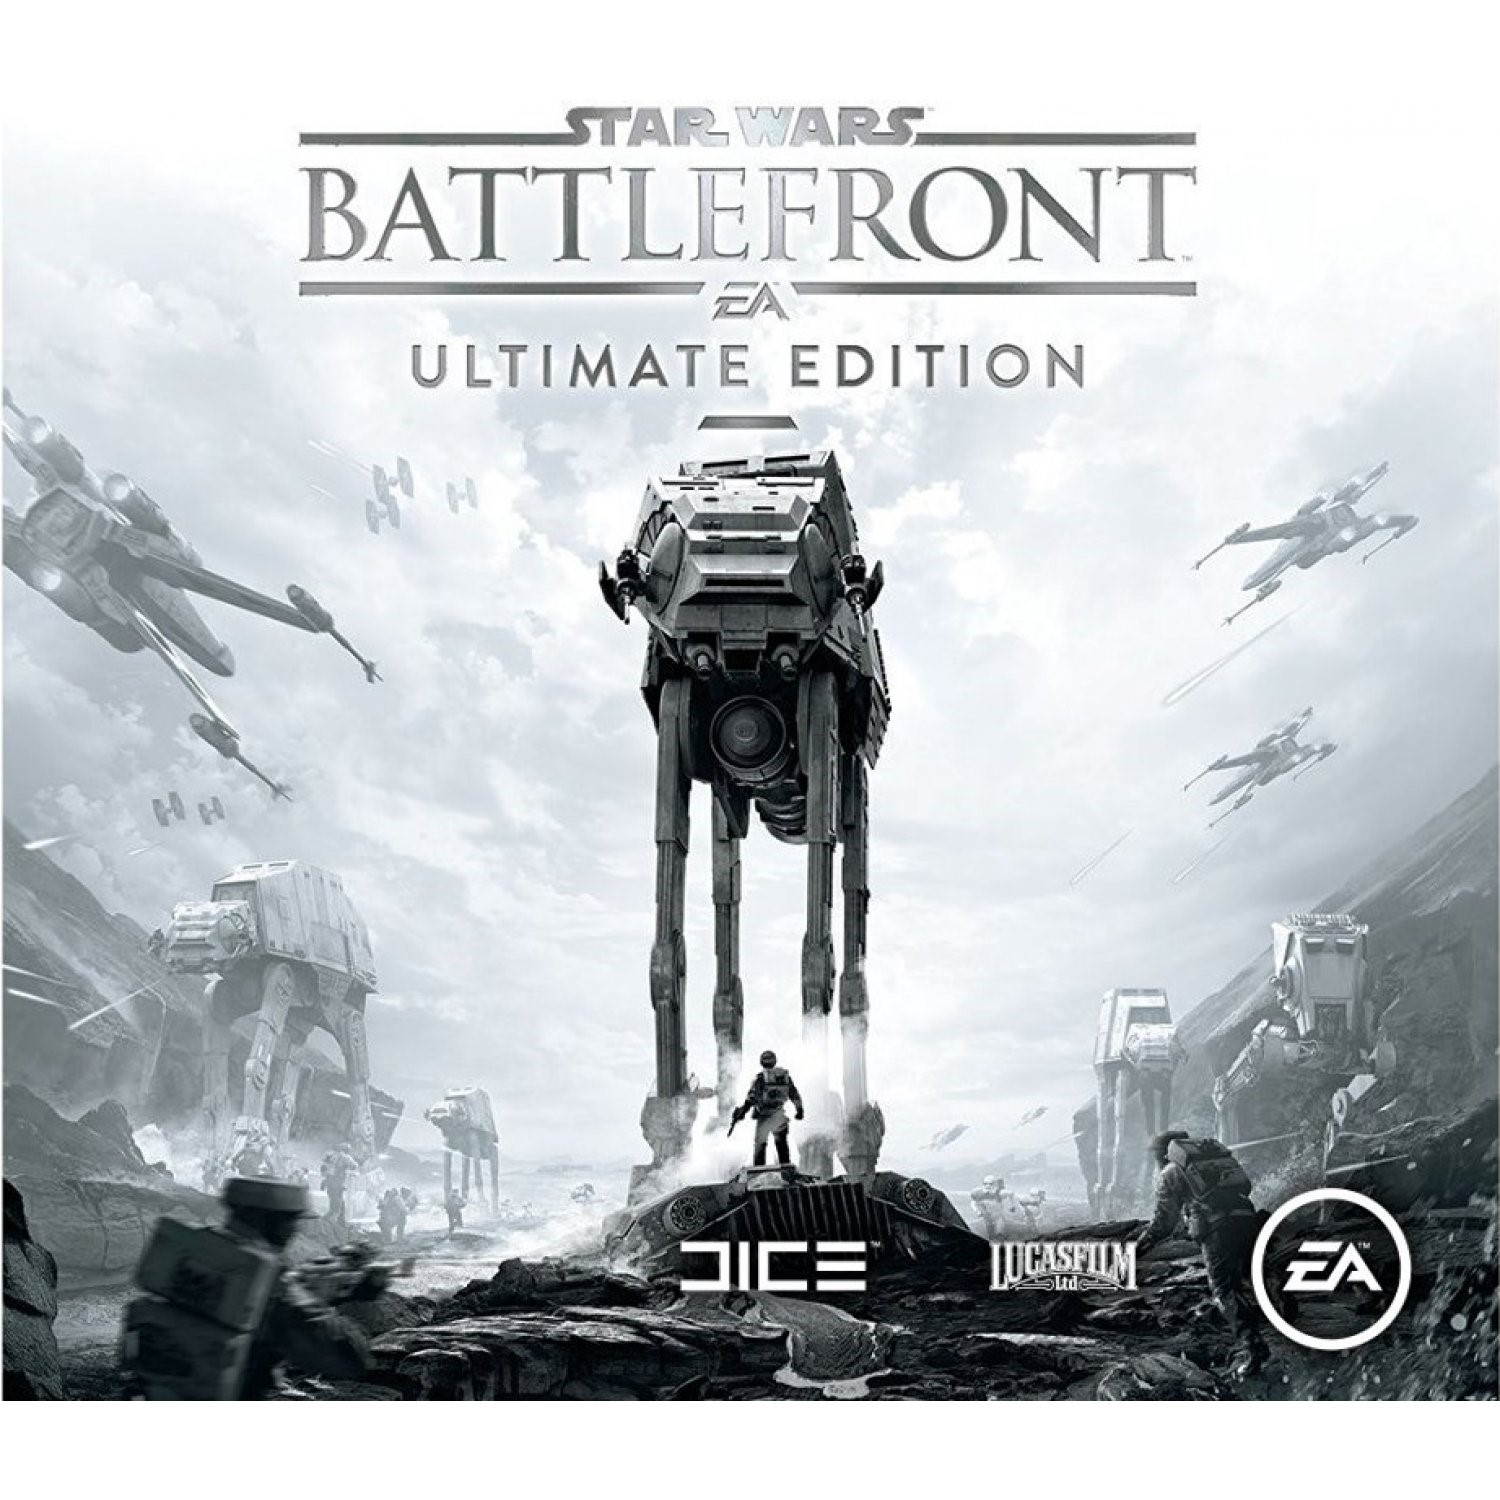 Star wars battlefront classic collection купить. Star Wars™ Battlefront™ Ultimate Edition. Батлфронт 2015 ПС 4. Самое полное издание Star Wars™ Battlefront™. Star Wars Battlefront Xbox.